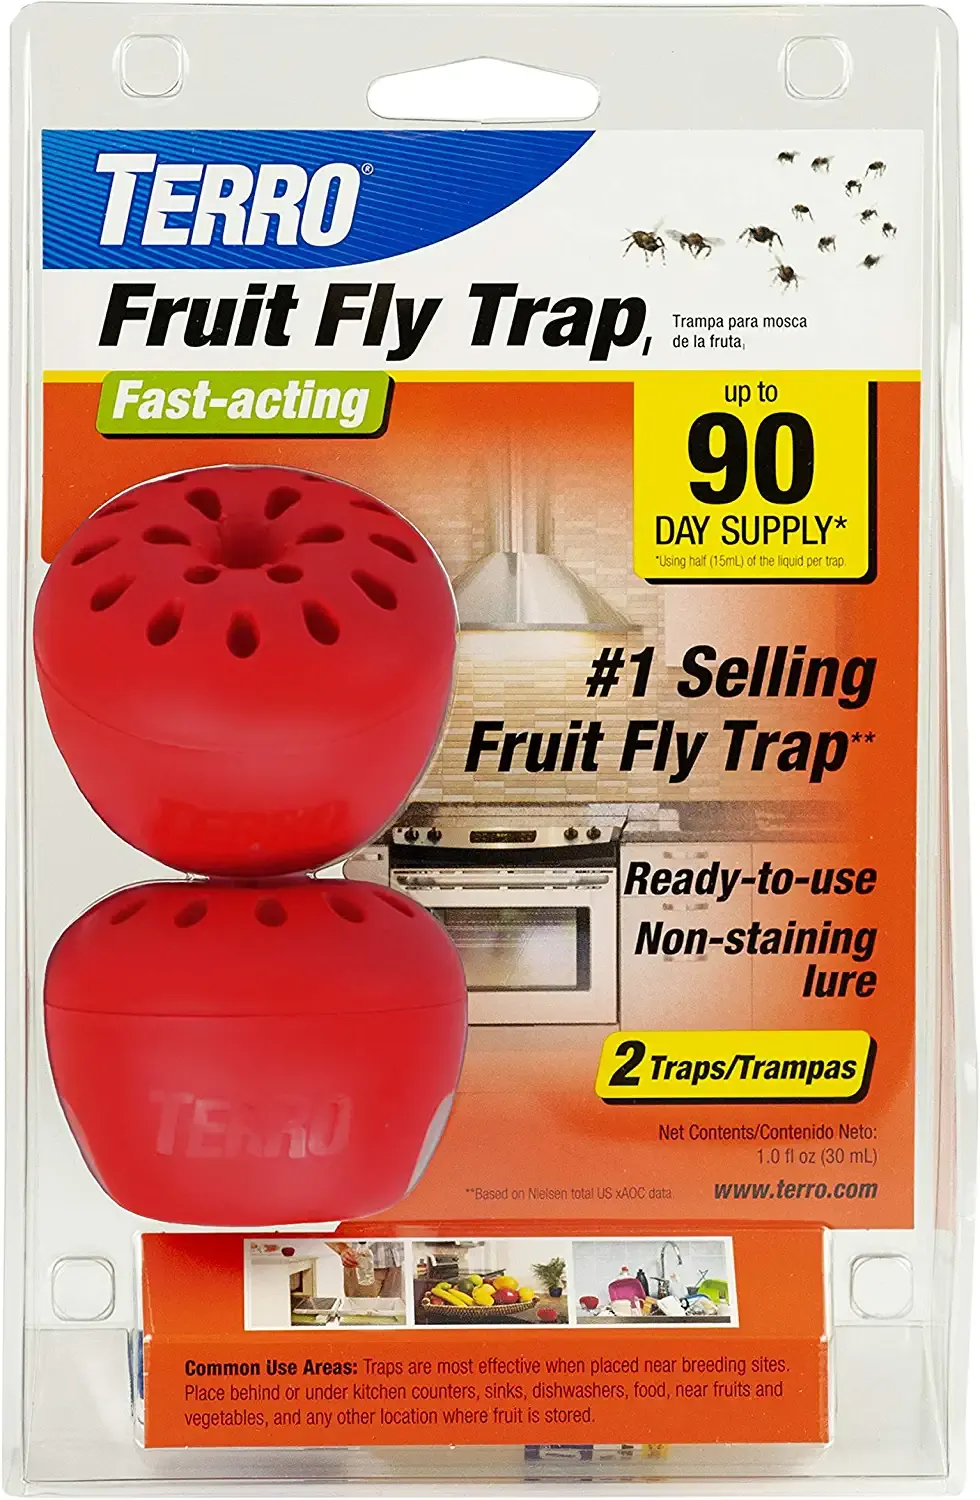 Protecker 1 Fruit Fly Trap Refill Liquid Only,2023 Fruit Fly Traps for  Indoors,Fruit Fly Killer for Home,Kitchen,Ready-to-Use Fly Trap Refil